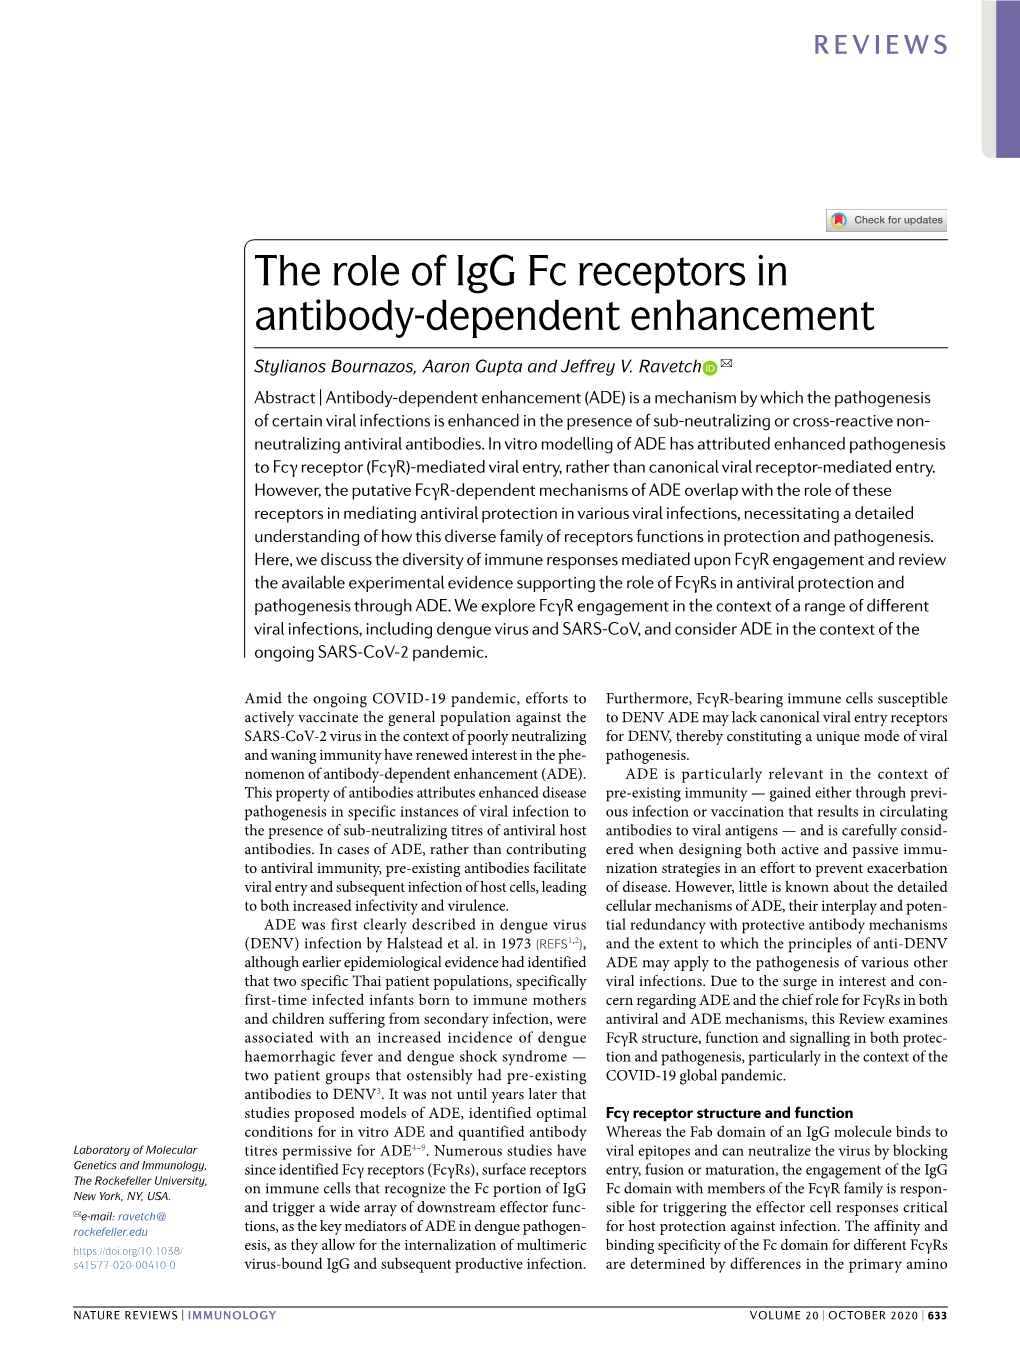 The Role of Igg Fc Receptors in Antibody-Dependent Enhancement